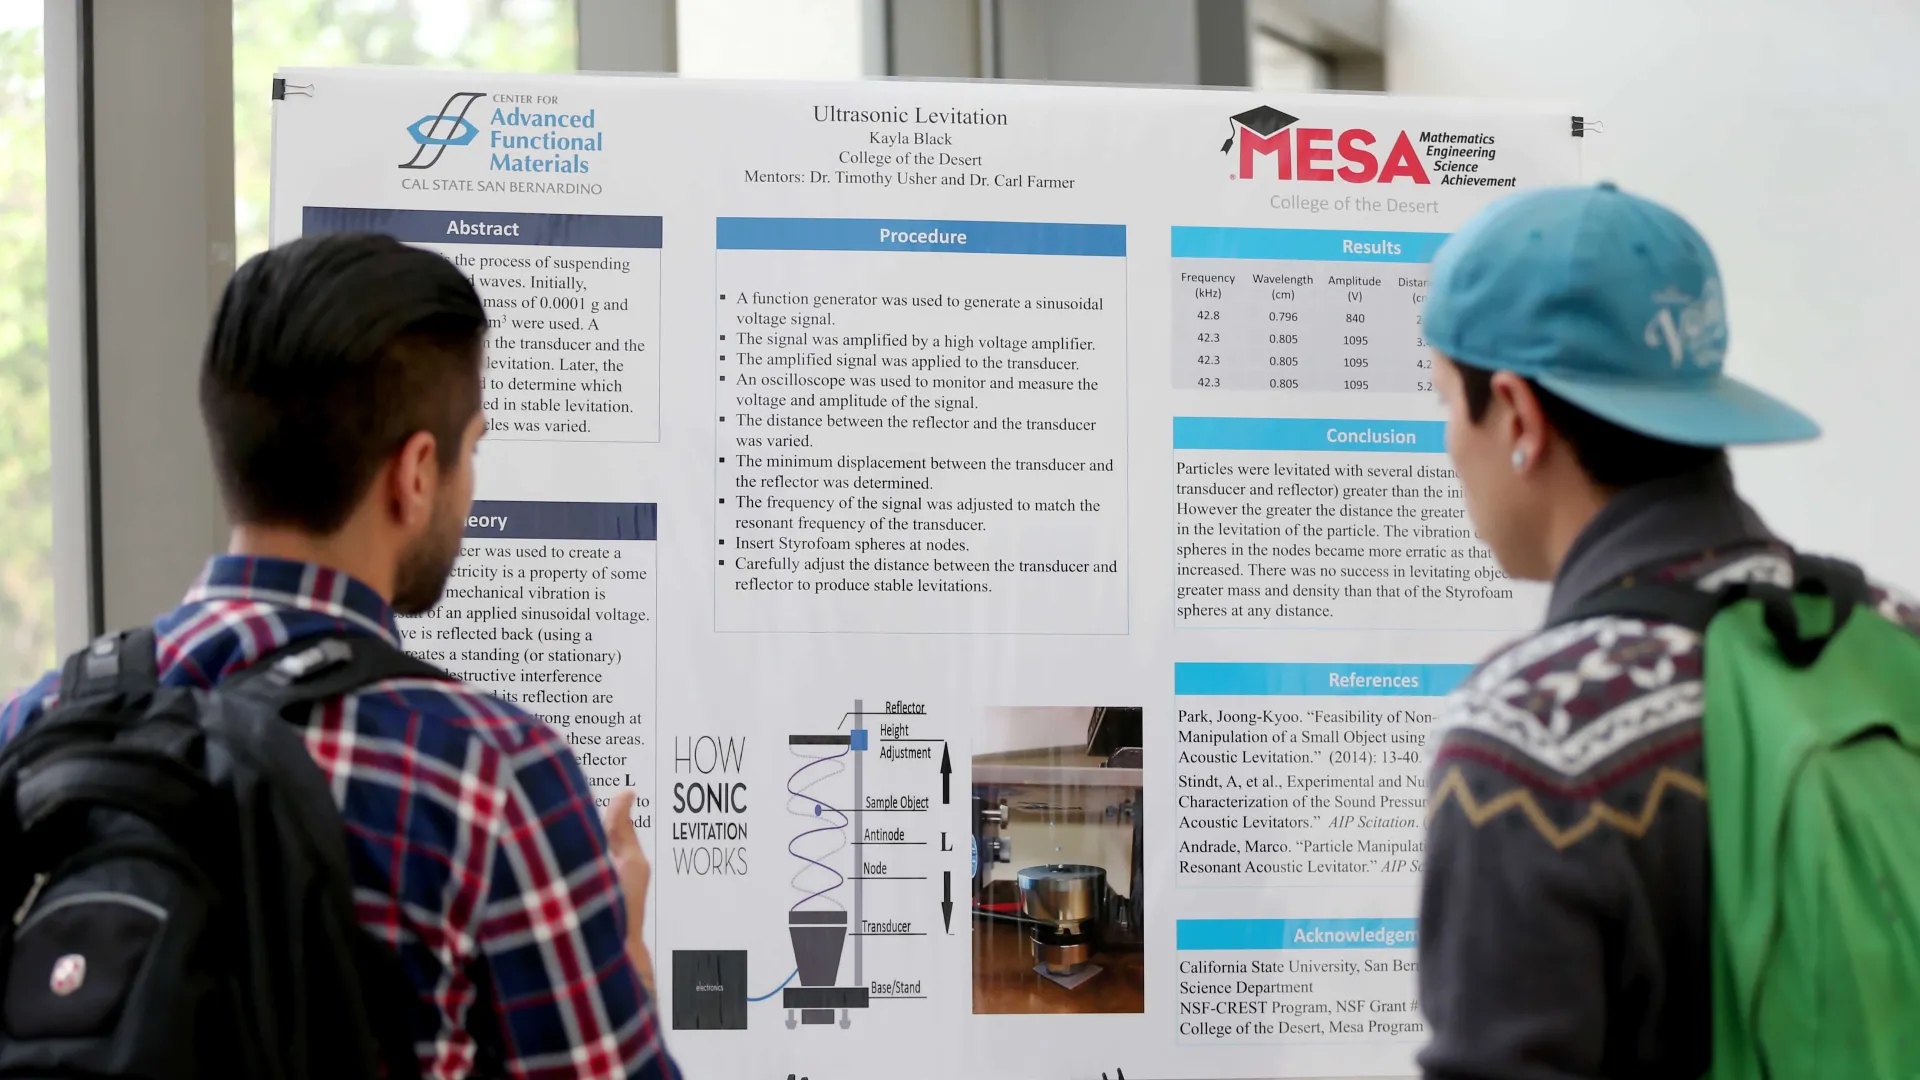 Student research poster presentations at the Center for Advanced Functional Materials Summer Research Open House and CREST Open House in July 2015. The CSUSB center is the recipient of National Science Foundation’s International Research Experiences for Students grant.